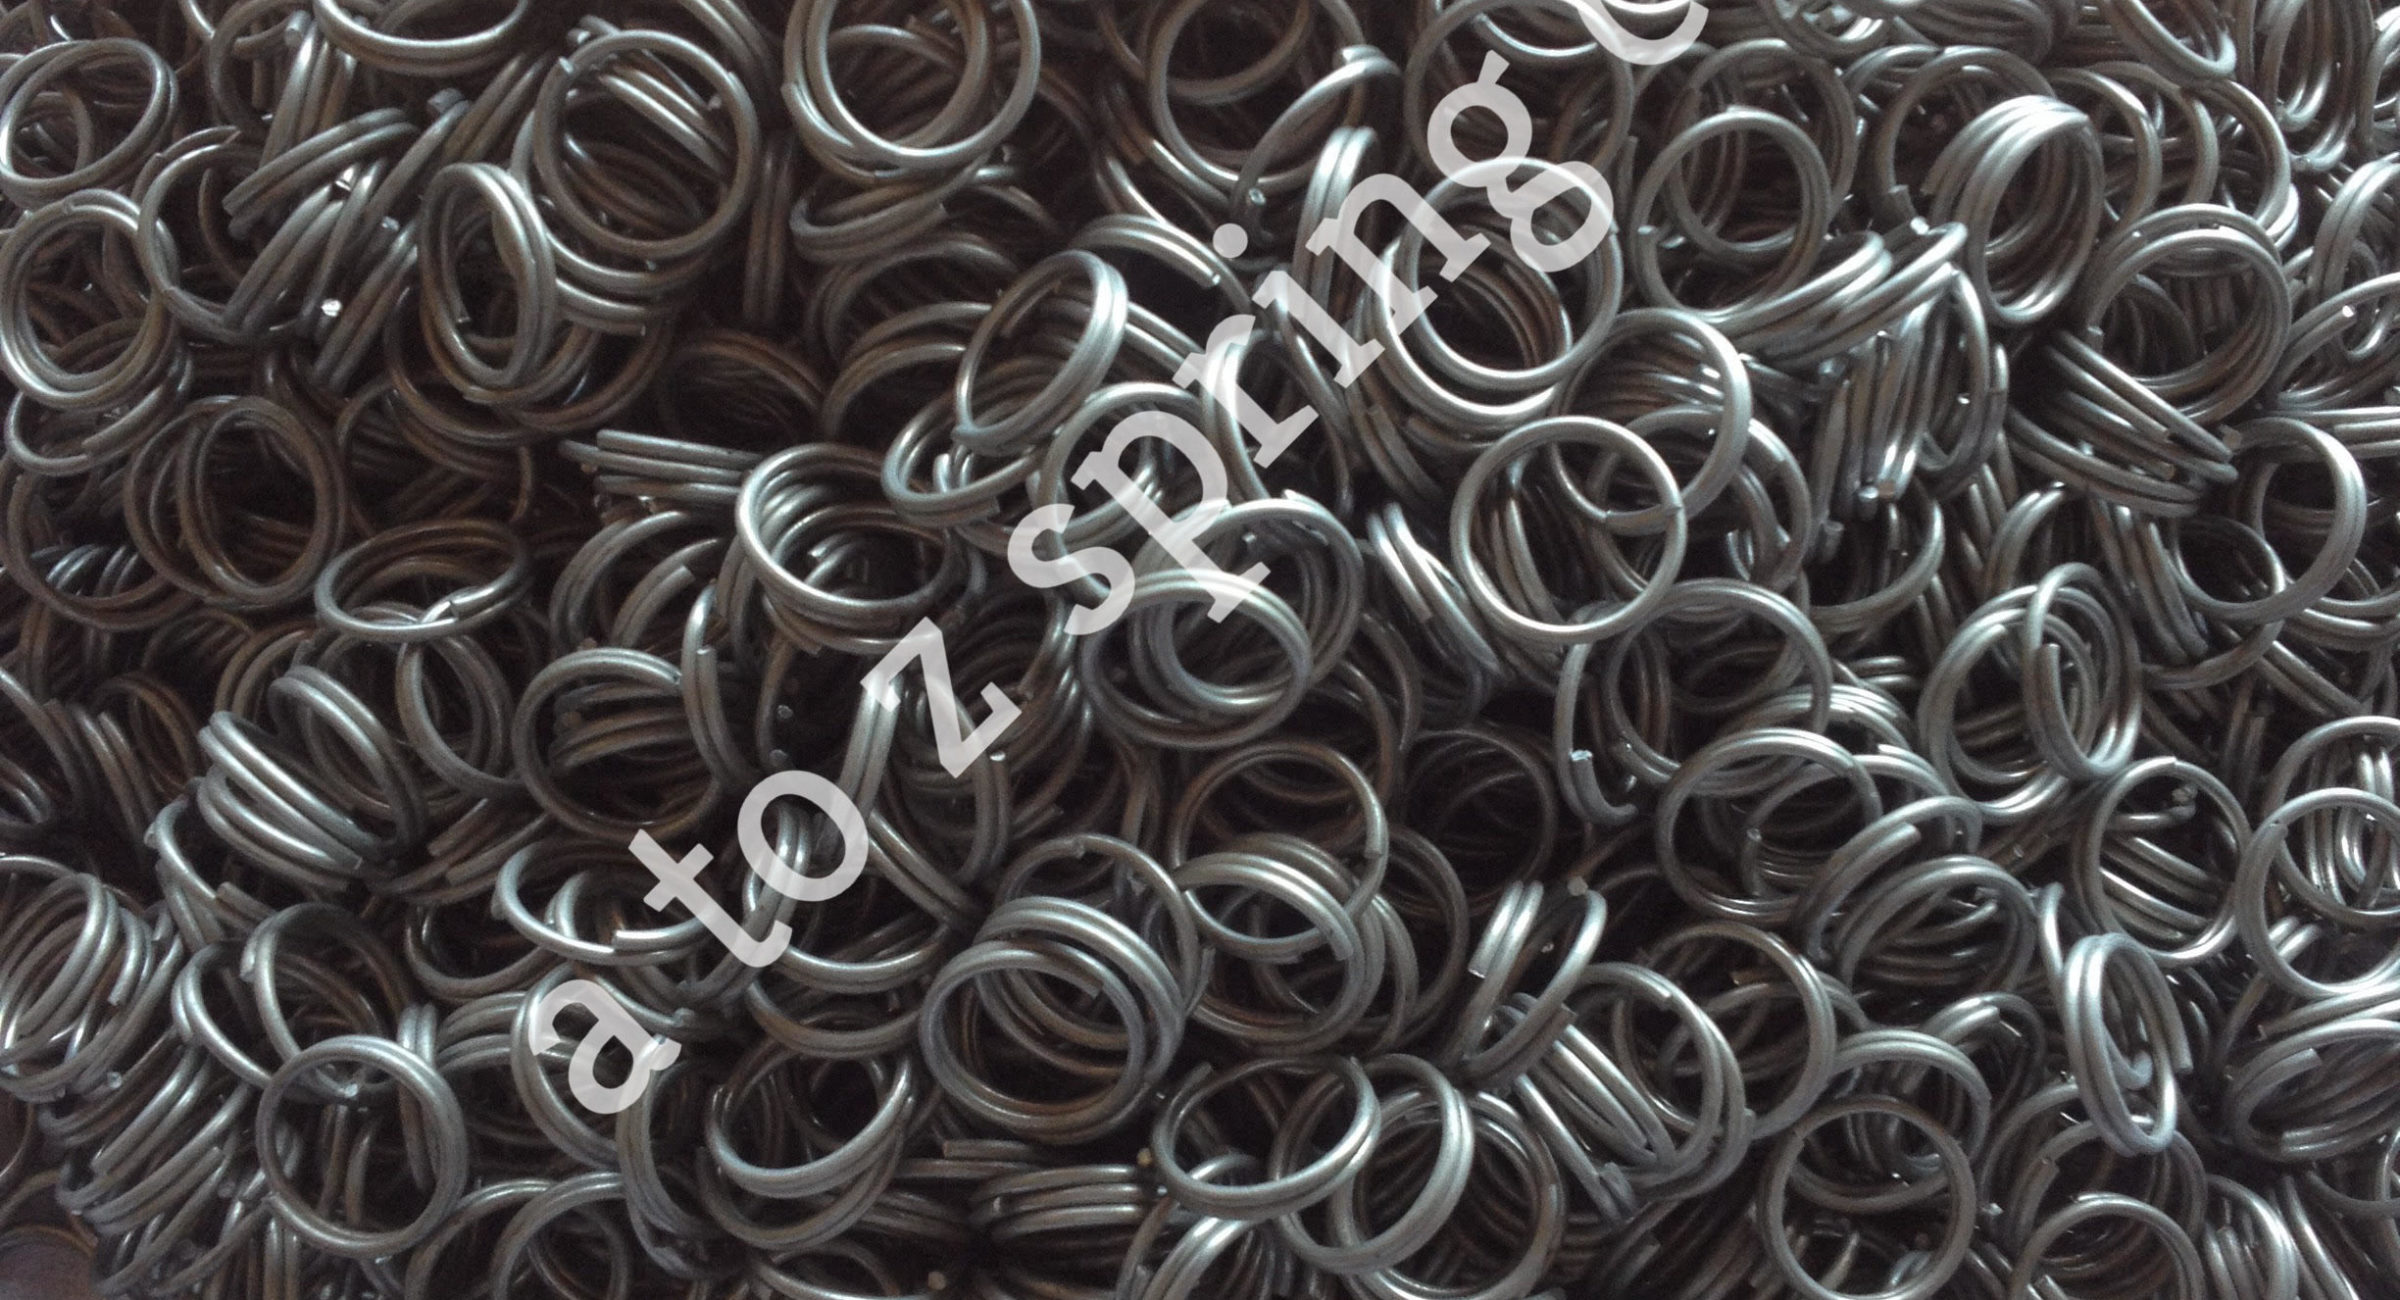 stainless steel wire ring manufacturers exporters wholsalers traders in vadodara gujarat india 